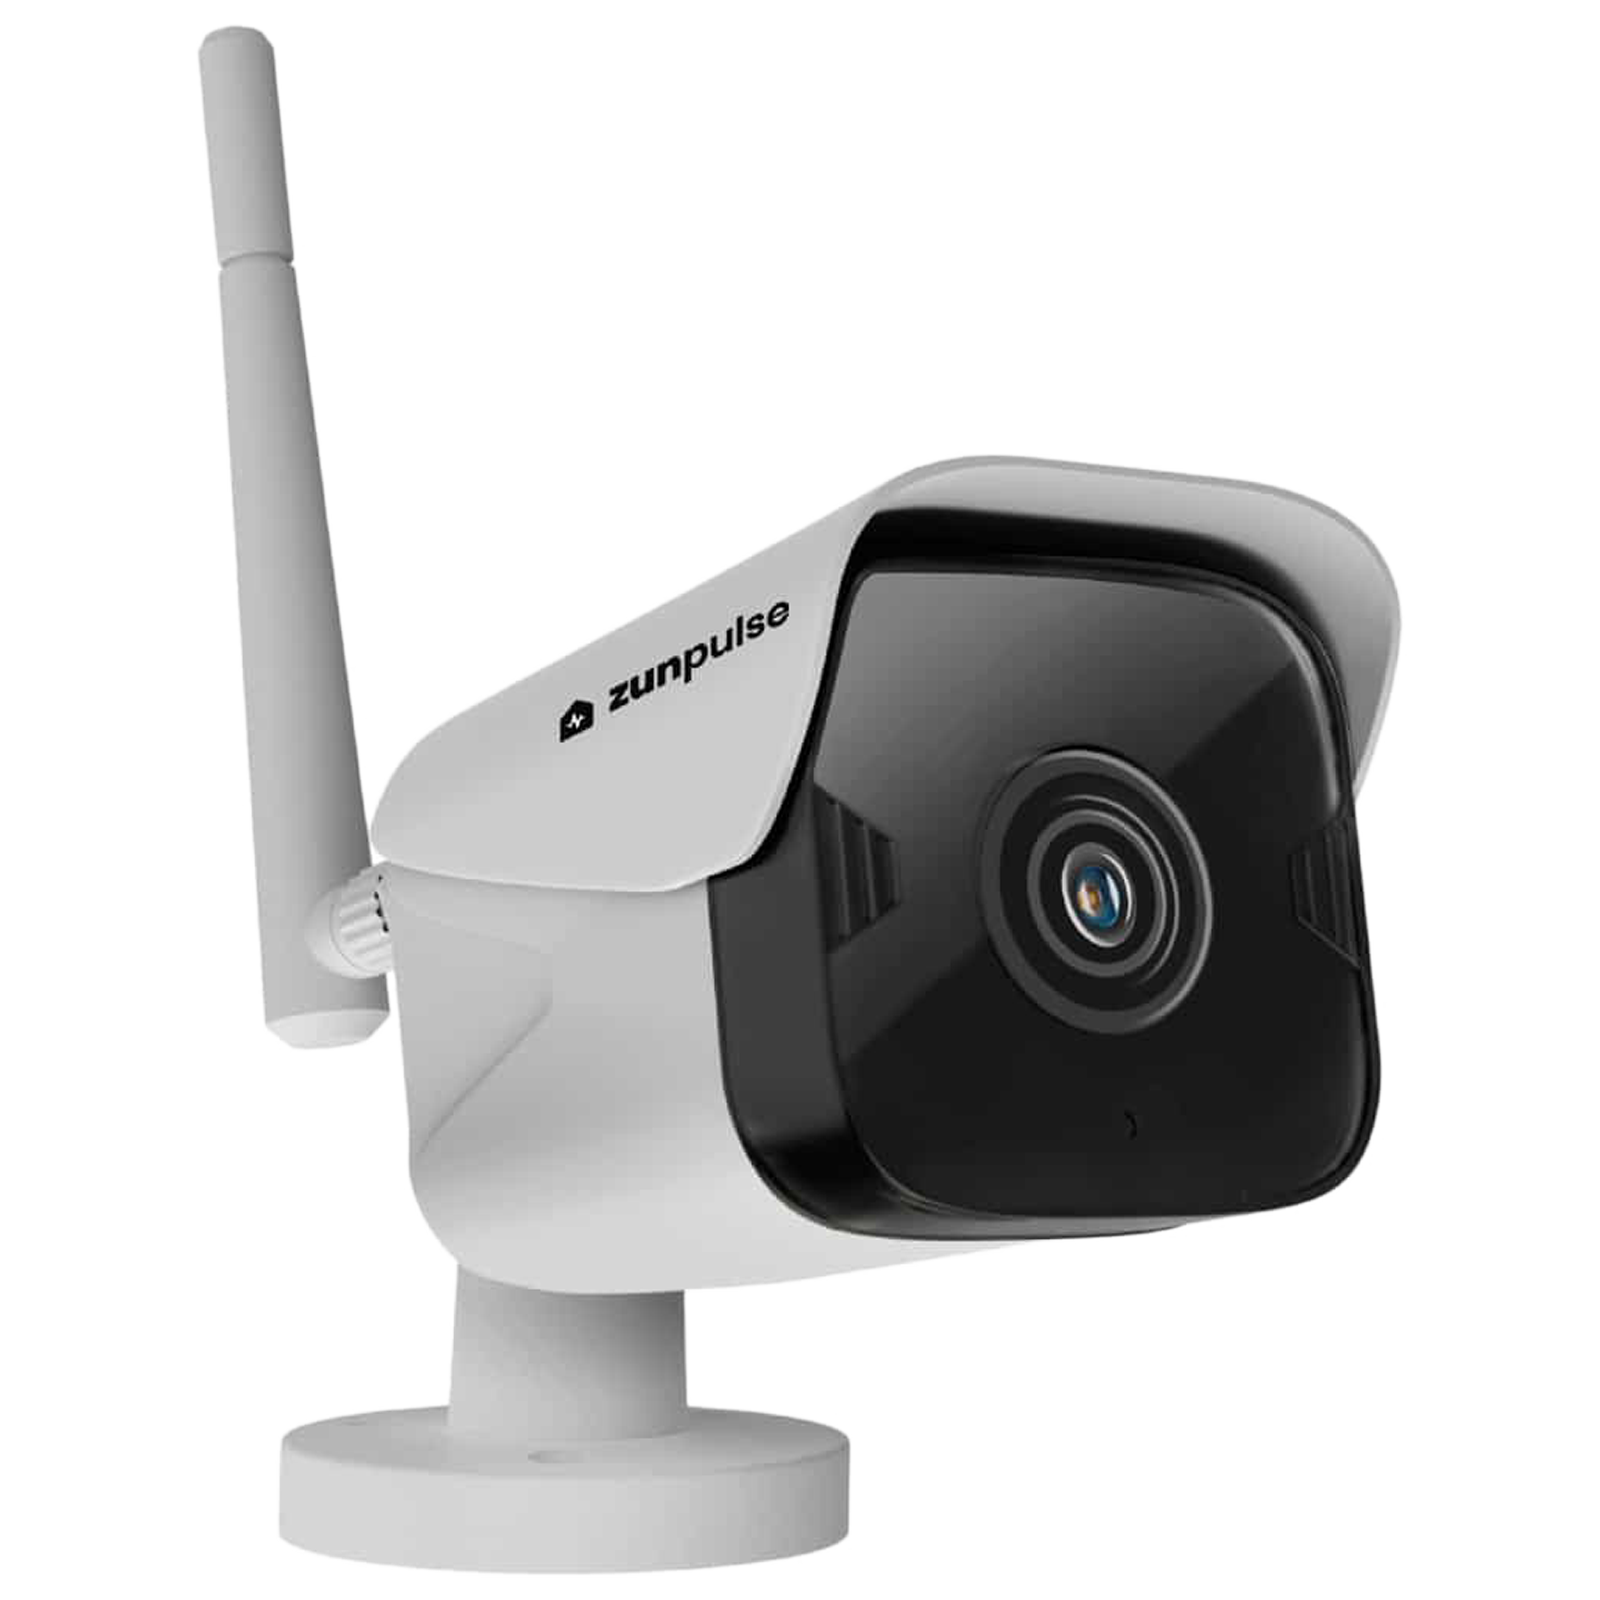 zunpulse CCTV Security Camera (Night Vision with Real-Time Monitoring, Camer - 720p, White)